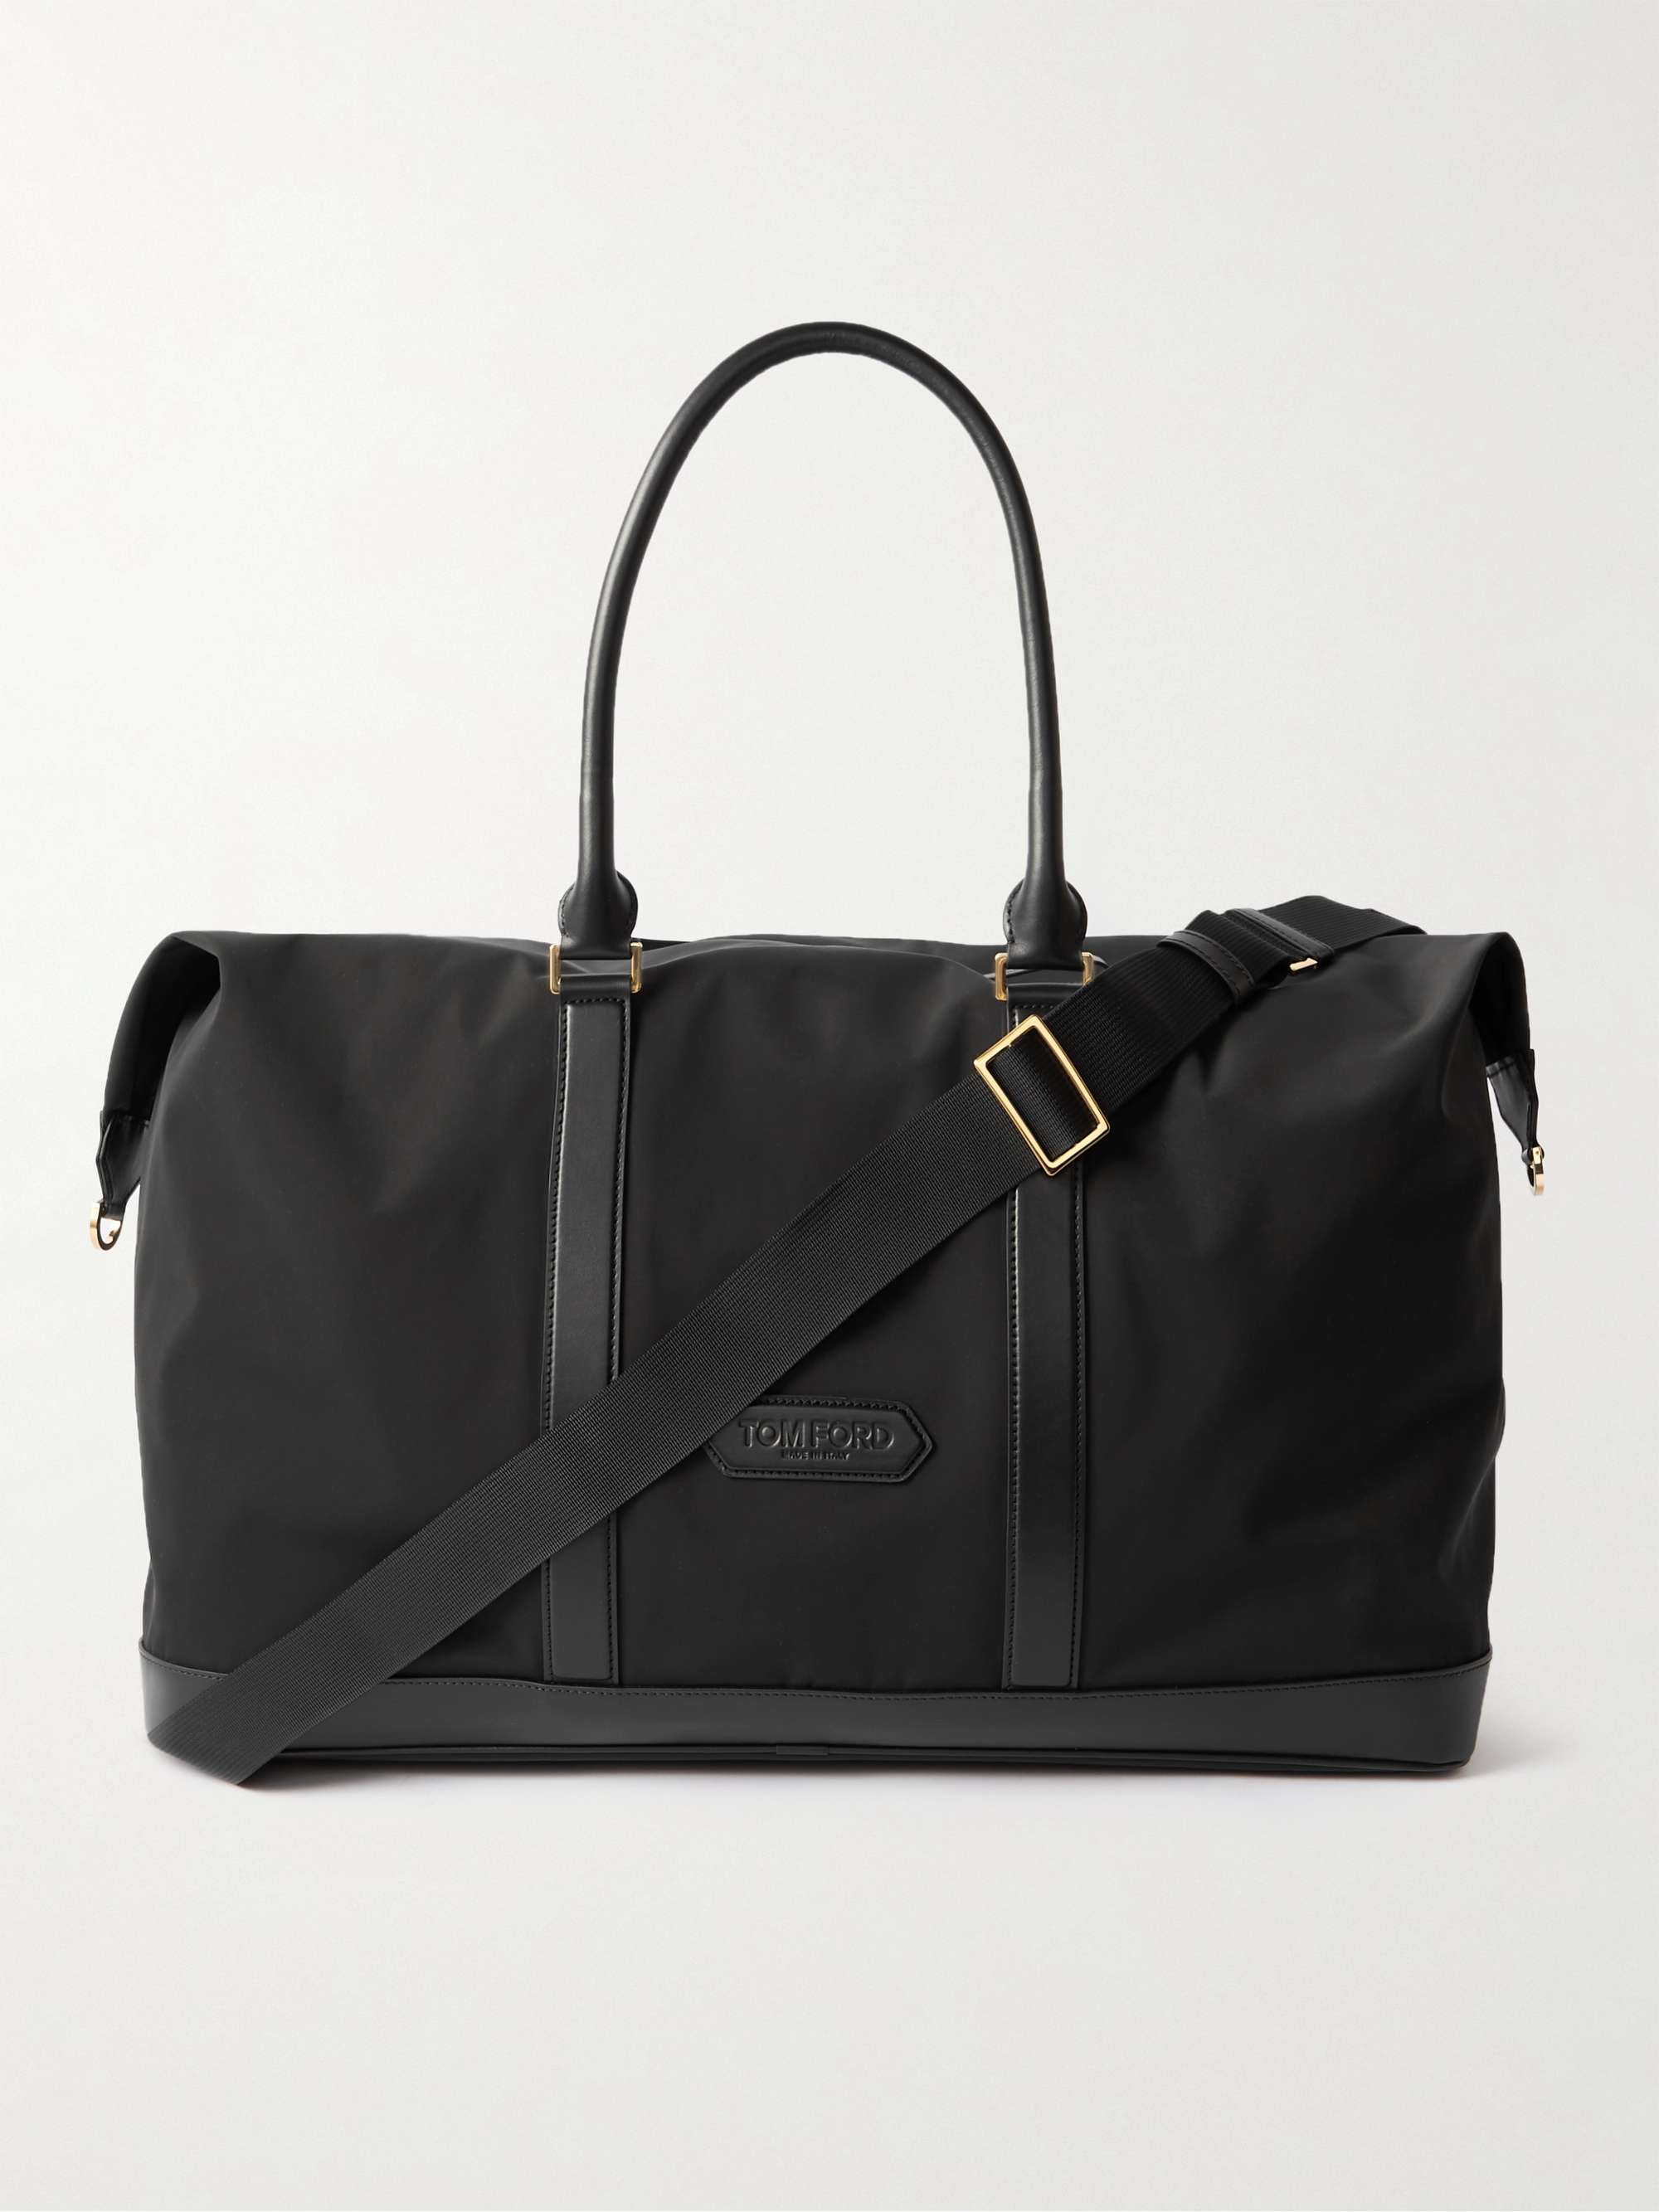 TOM FORD Leather-Trimmed Nylon Weekend Bag